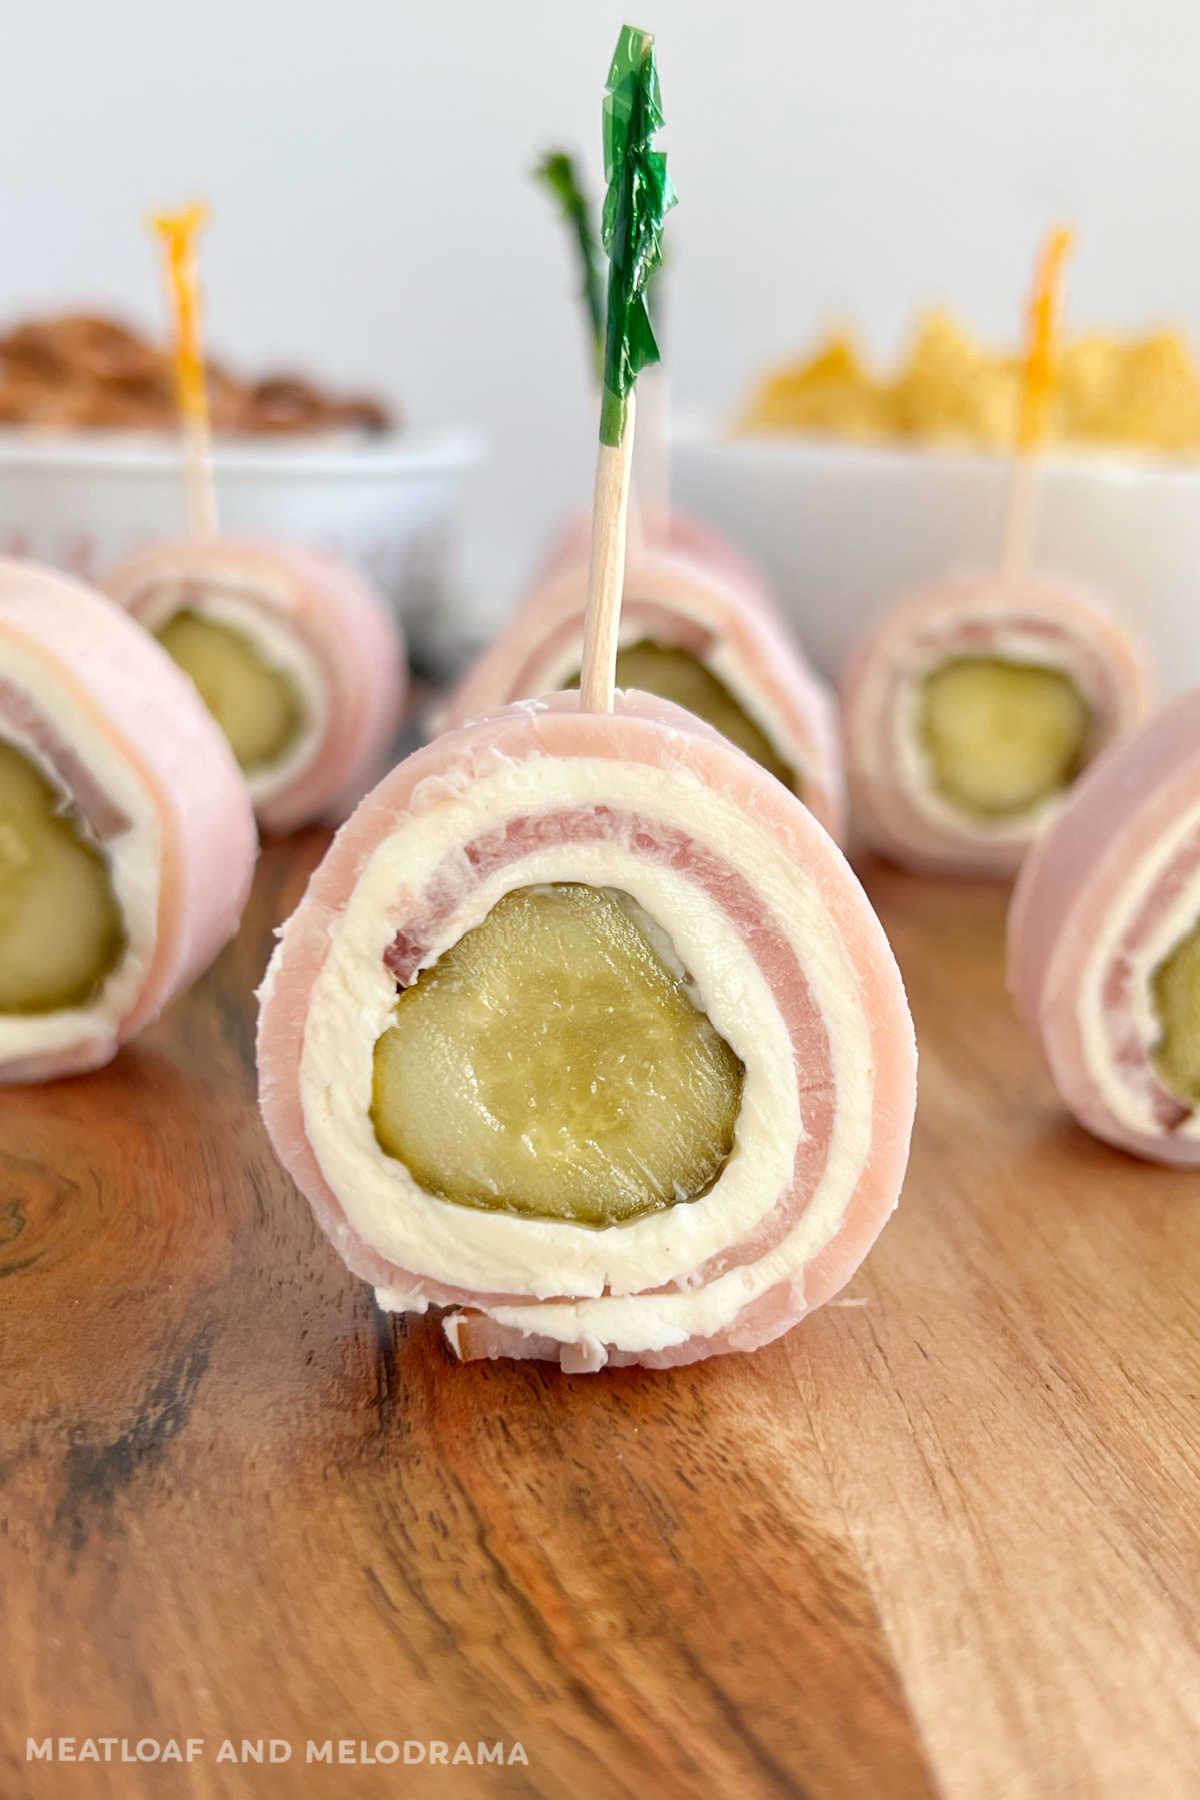 ham pickle roll ups with cream cheese (Polish sushi) on charcuterie board